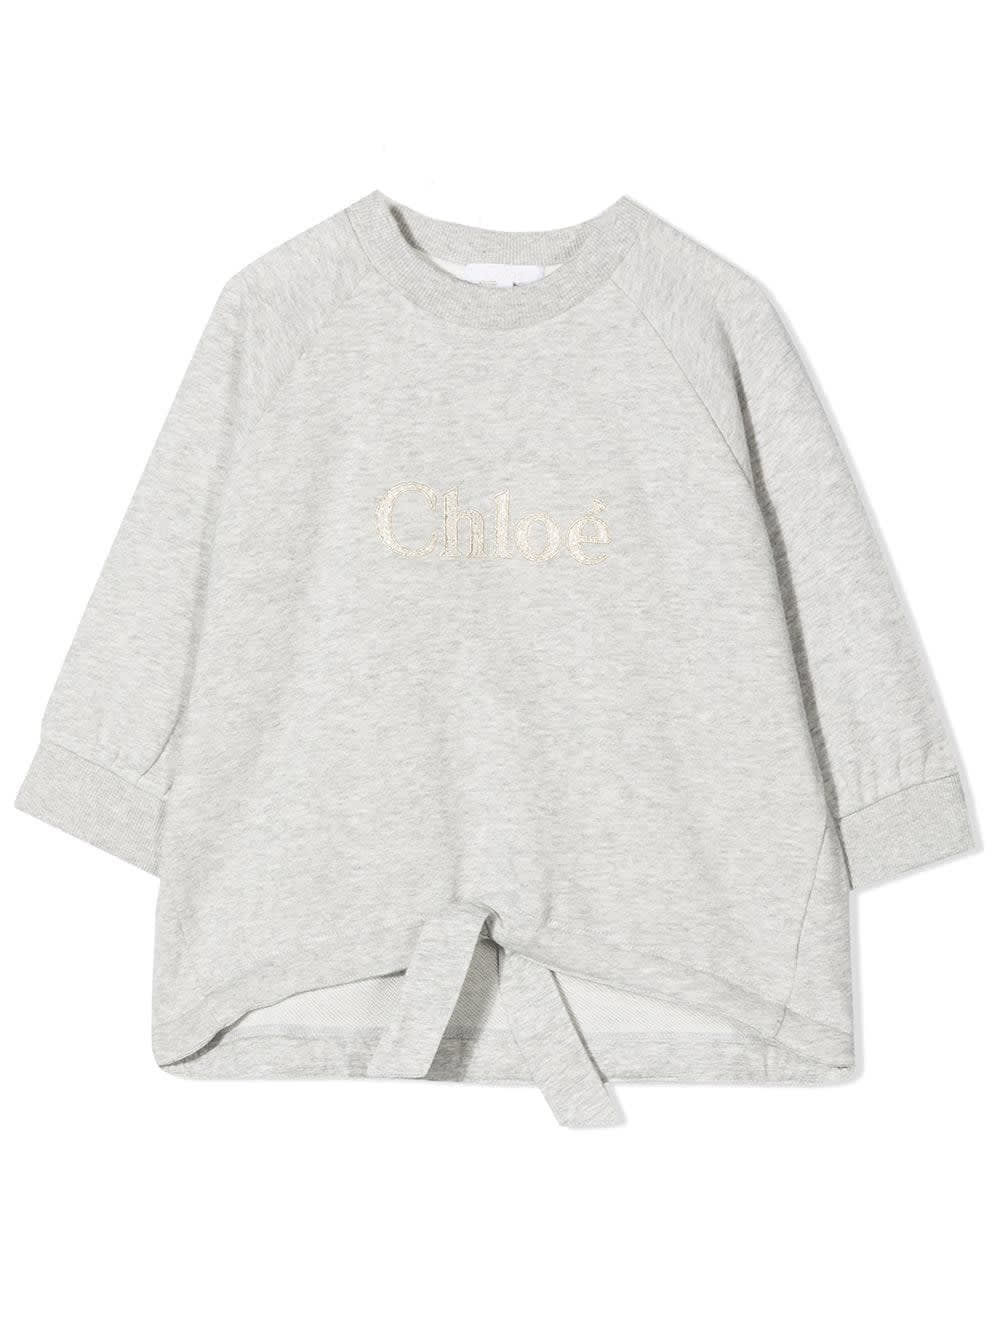 Chloé Sweatshirt With Embroidered Logo